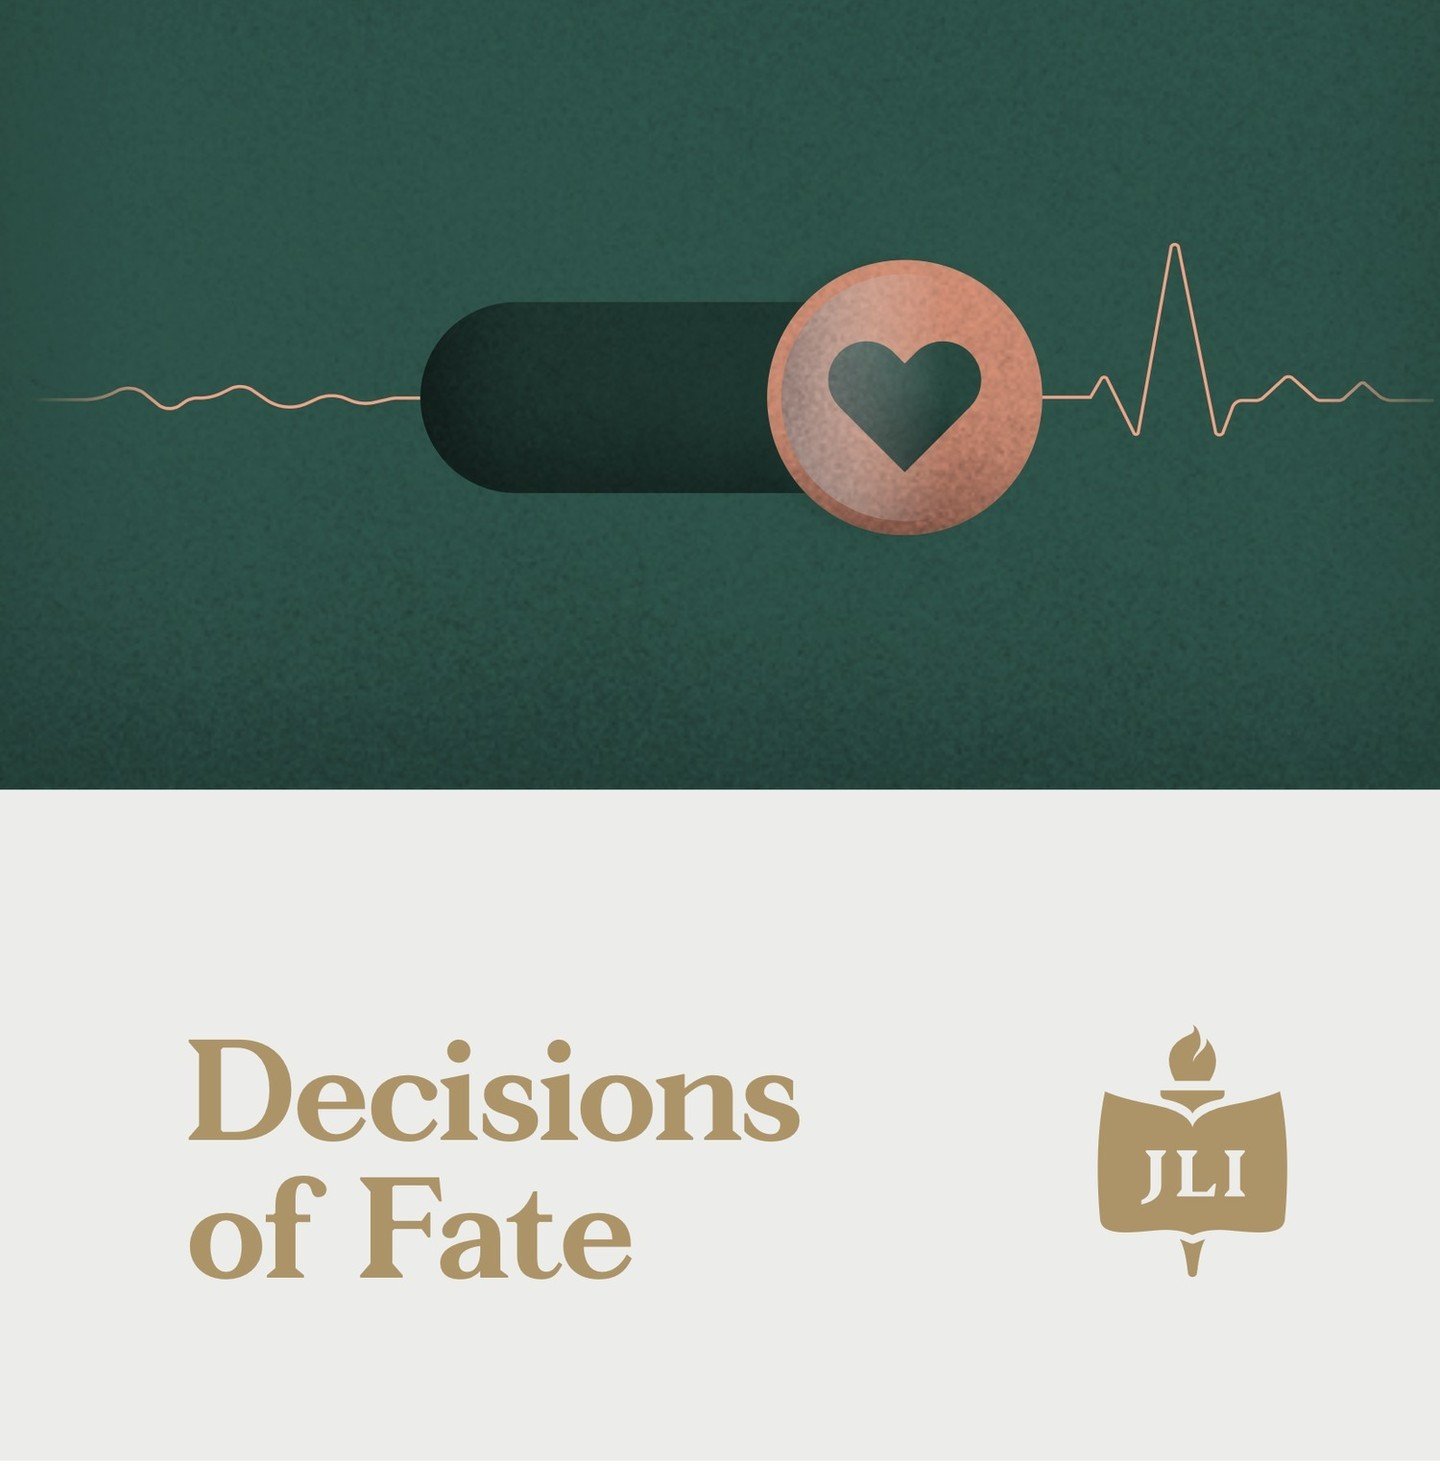 NEW CLASS! DECISIONS OF FATE: Explore how modern medical dilemmas can be ethically resolved through thoughtful analysis of analogous cases in medical ethics, classical Jewish legal literature, and U.S. Law.
ㅤ
CME credit and CLE accredited 4-part cour